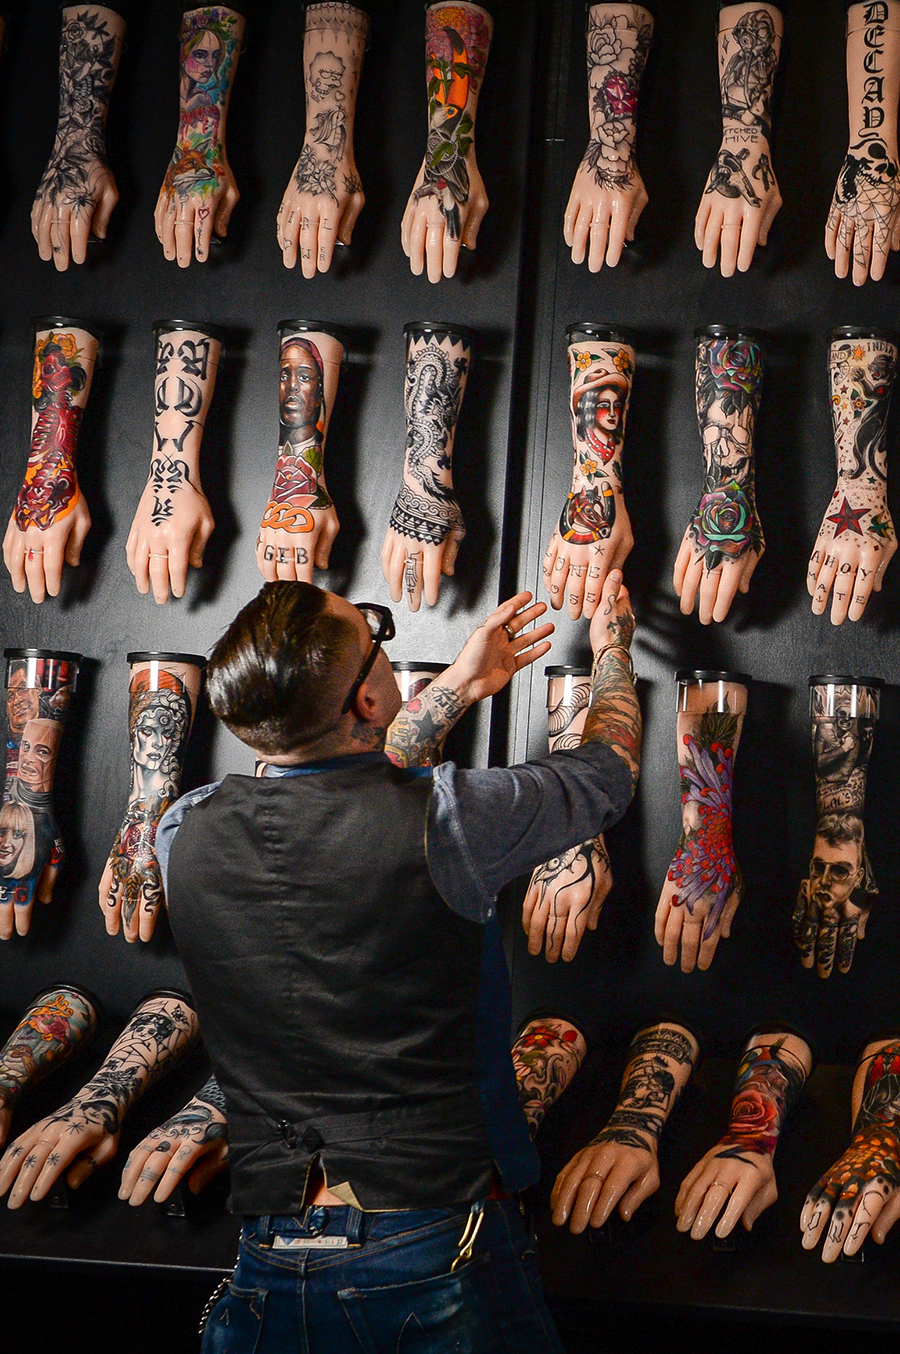 exhibition curator, dr matt lodder, puts the finishing touches to the one hundred silicone arms on display at the national maritime museum in falmouth, cornwall, part of the exhibition tattoo british tattoo art revealed photo by ben birchallpa images via getty images